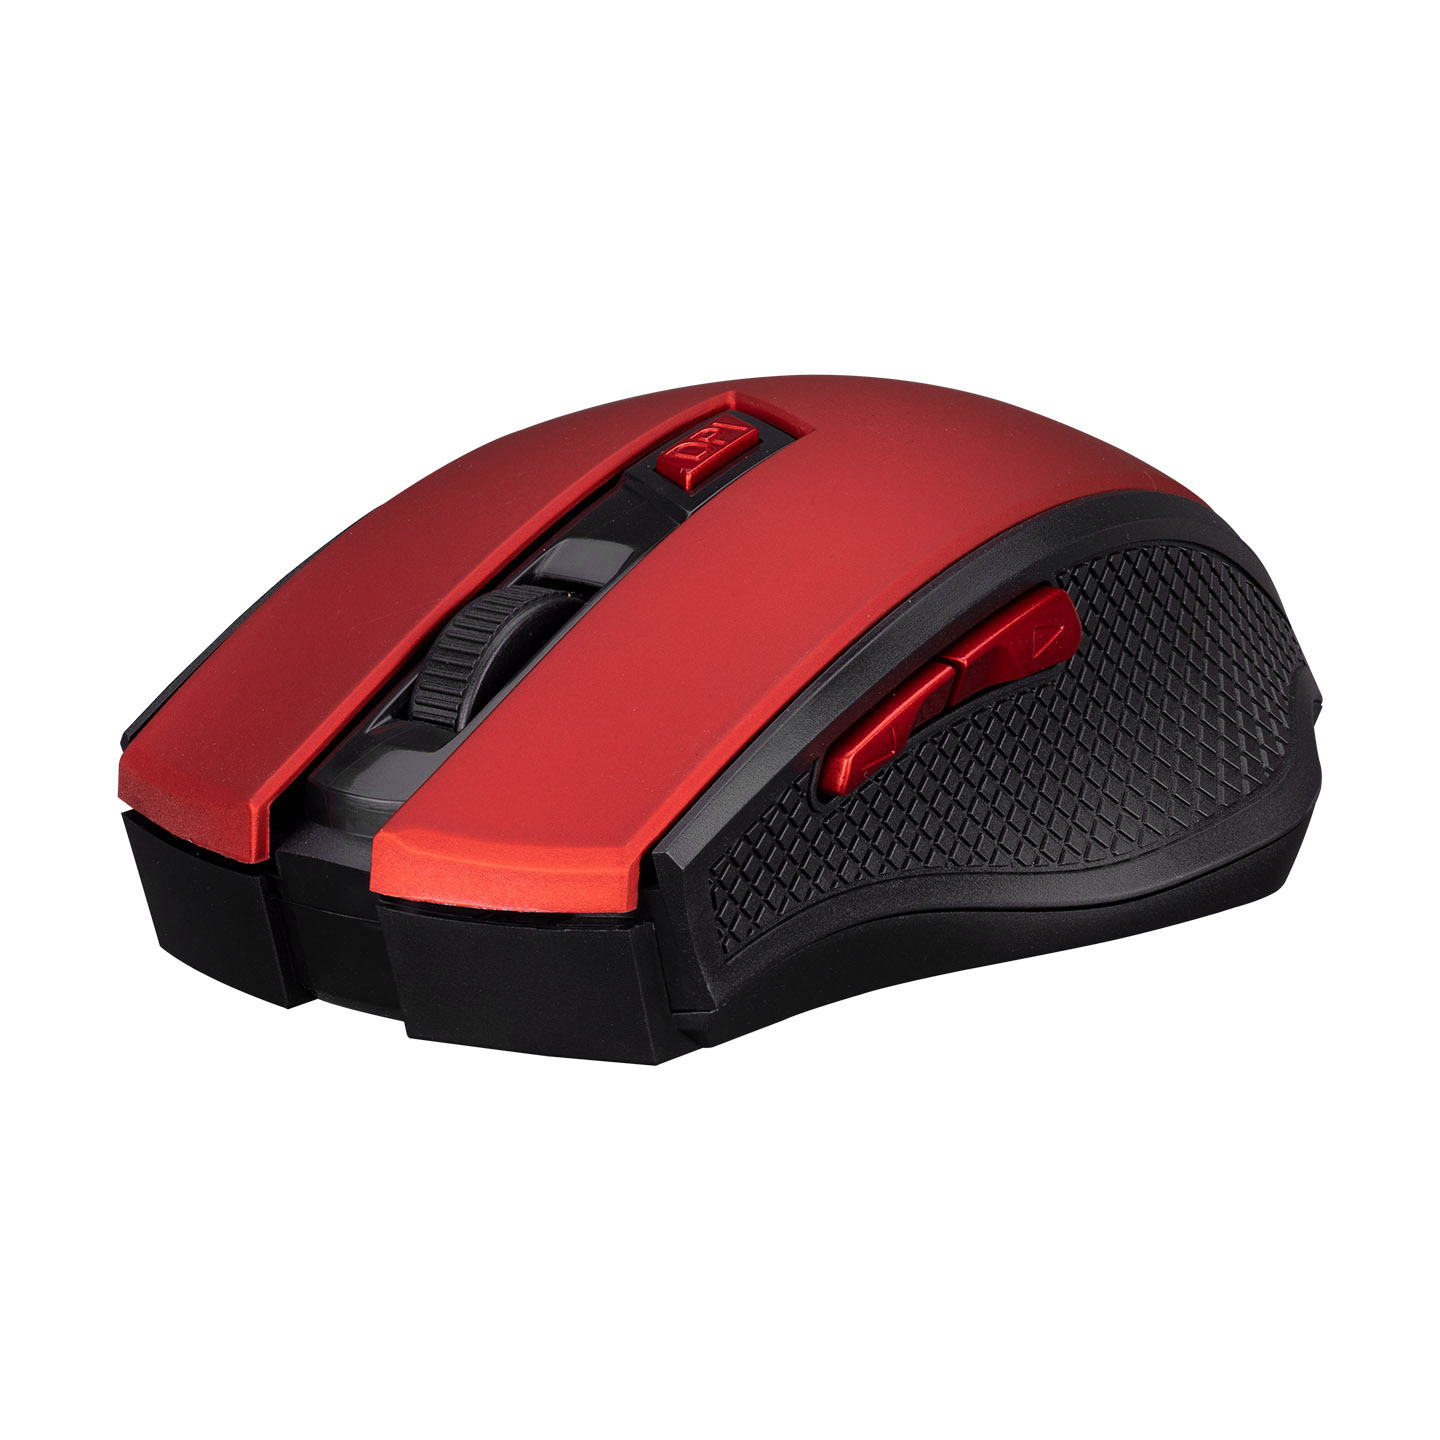 Everest SMW-777 Usb Red 2.4Ghz Optical Wireless Mouse